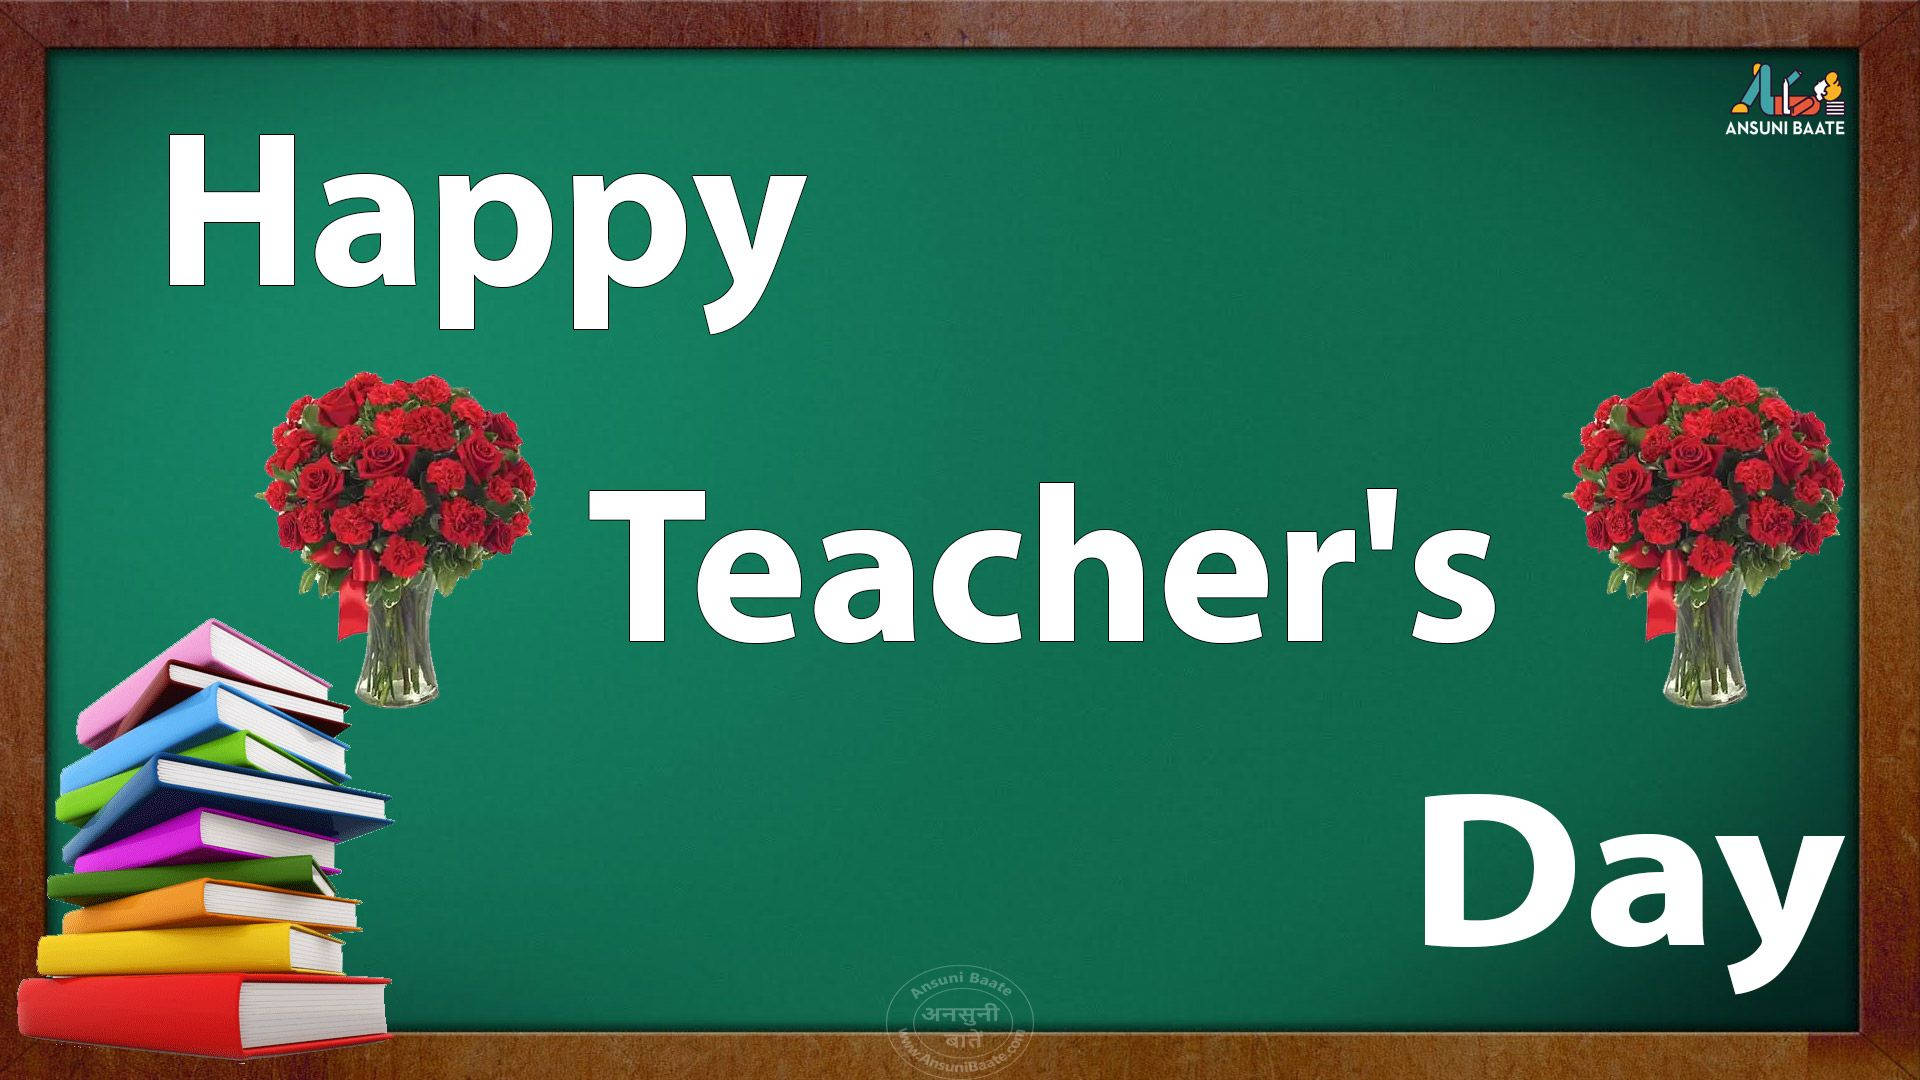 Happy Teachers' Day Books And Roses Background